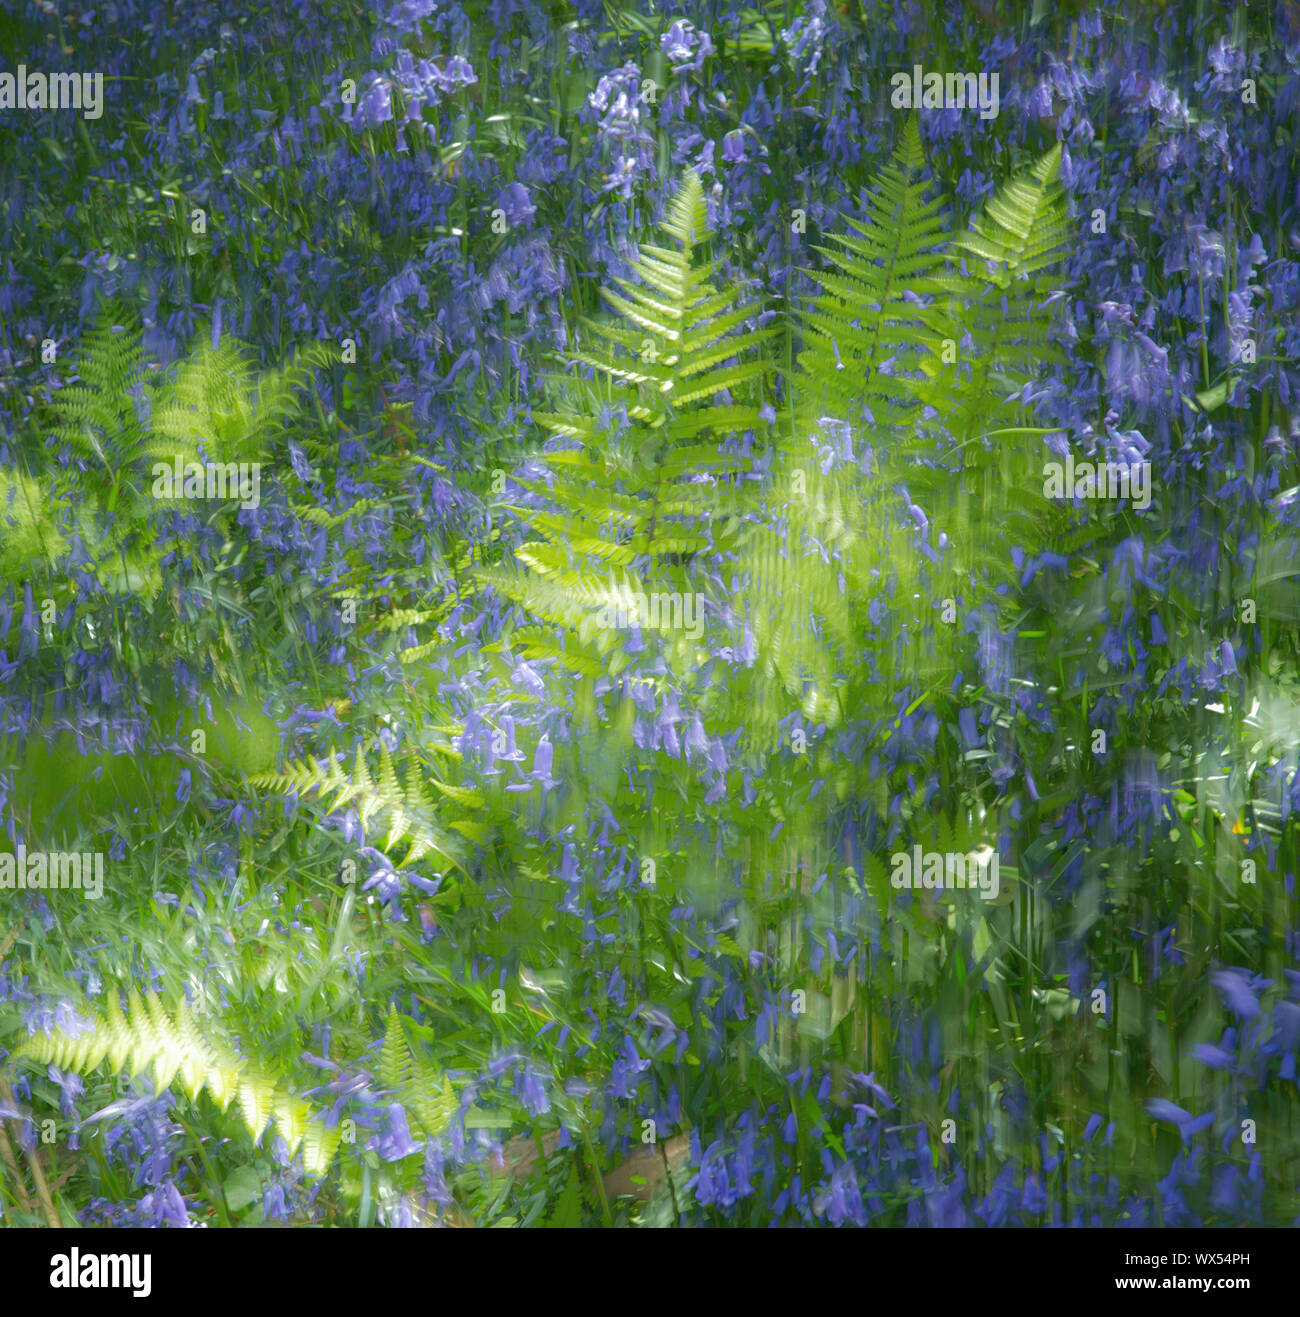 Ferns and bluebells lit by the dappled light Stock Photo